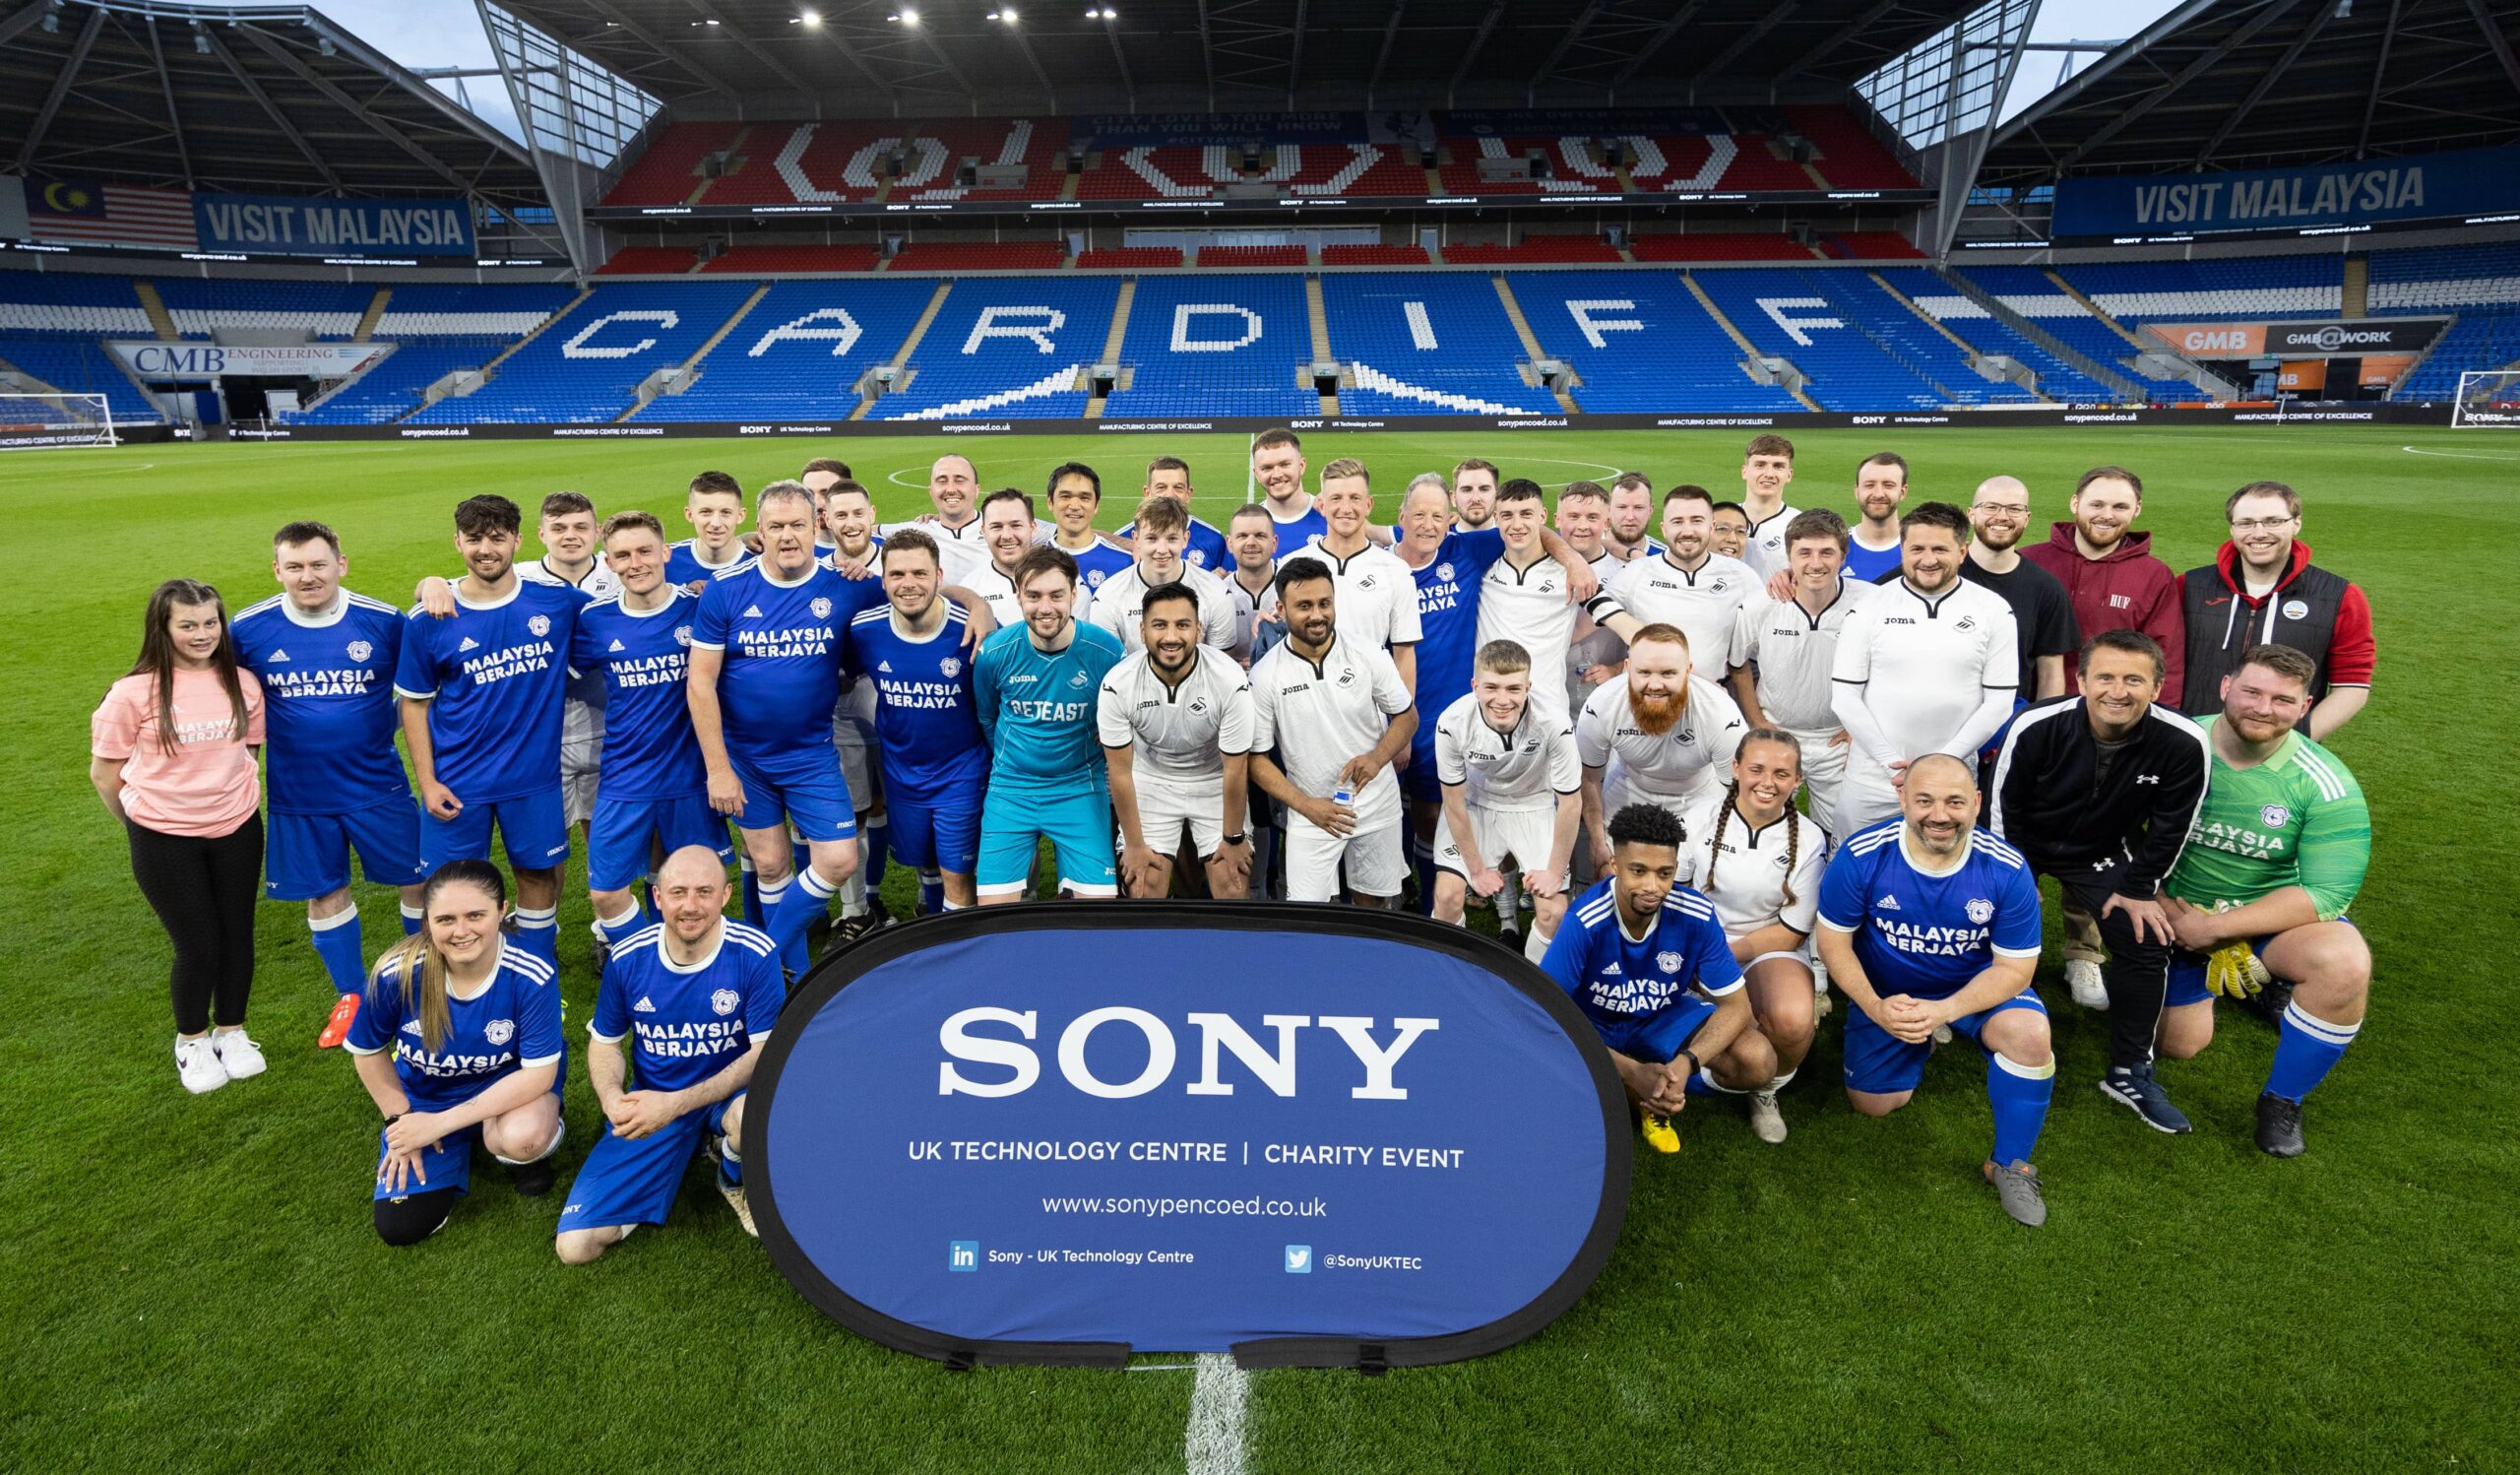 Two football teams dressed in white and blue uniforms standing on the Cardiff City Football Club pitch. In front them is a blue banner with the text 'Sony UK Technology Centre Charity Event'